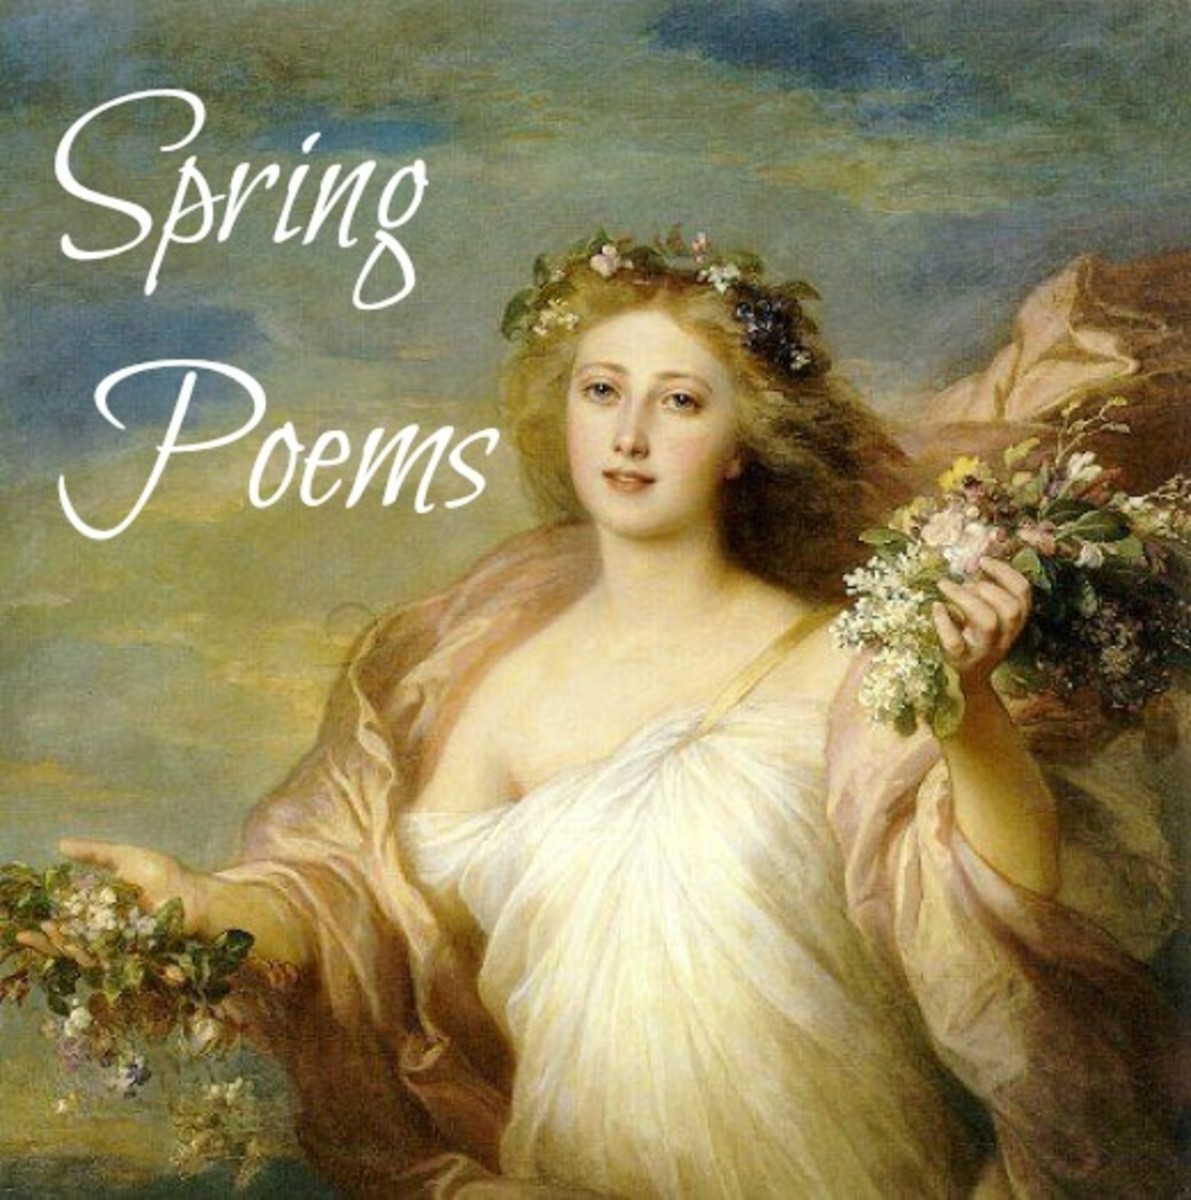 SPRING POEMS: 60 Best Spring Poems and Spring Poems for Kids - HubPages